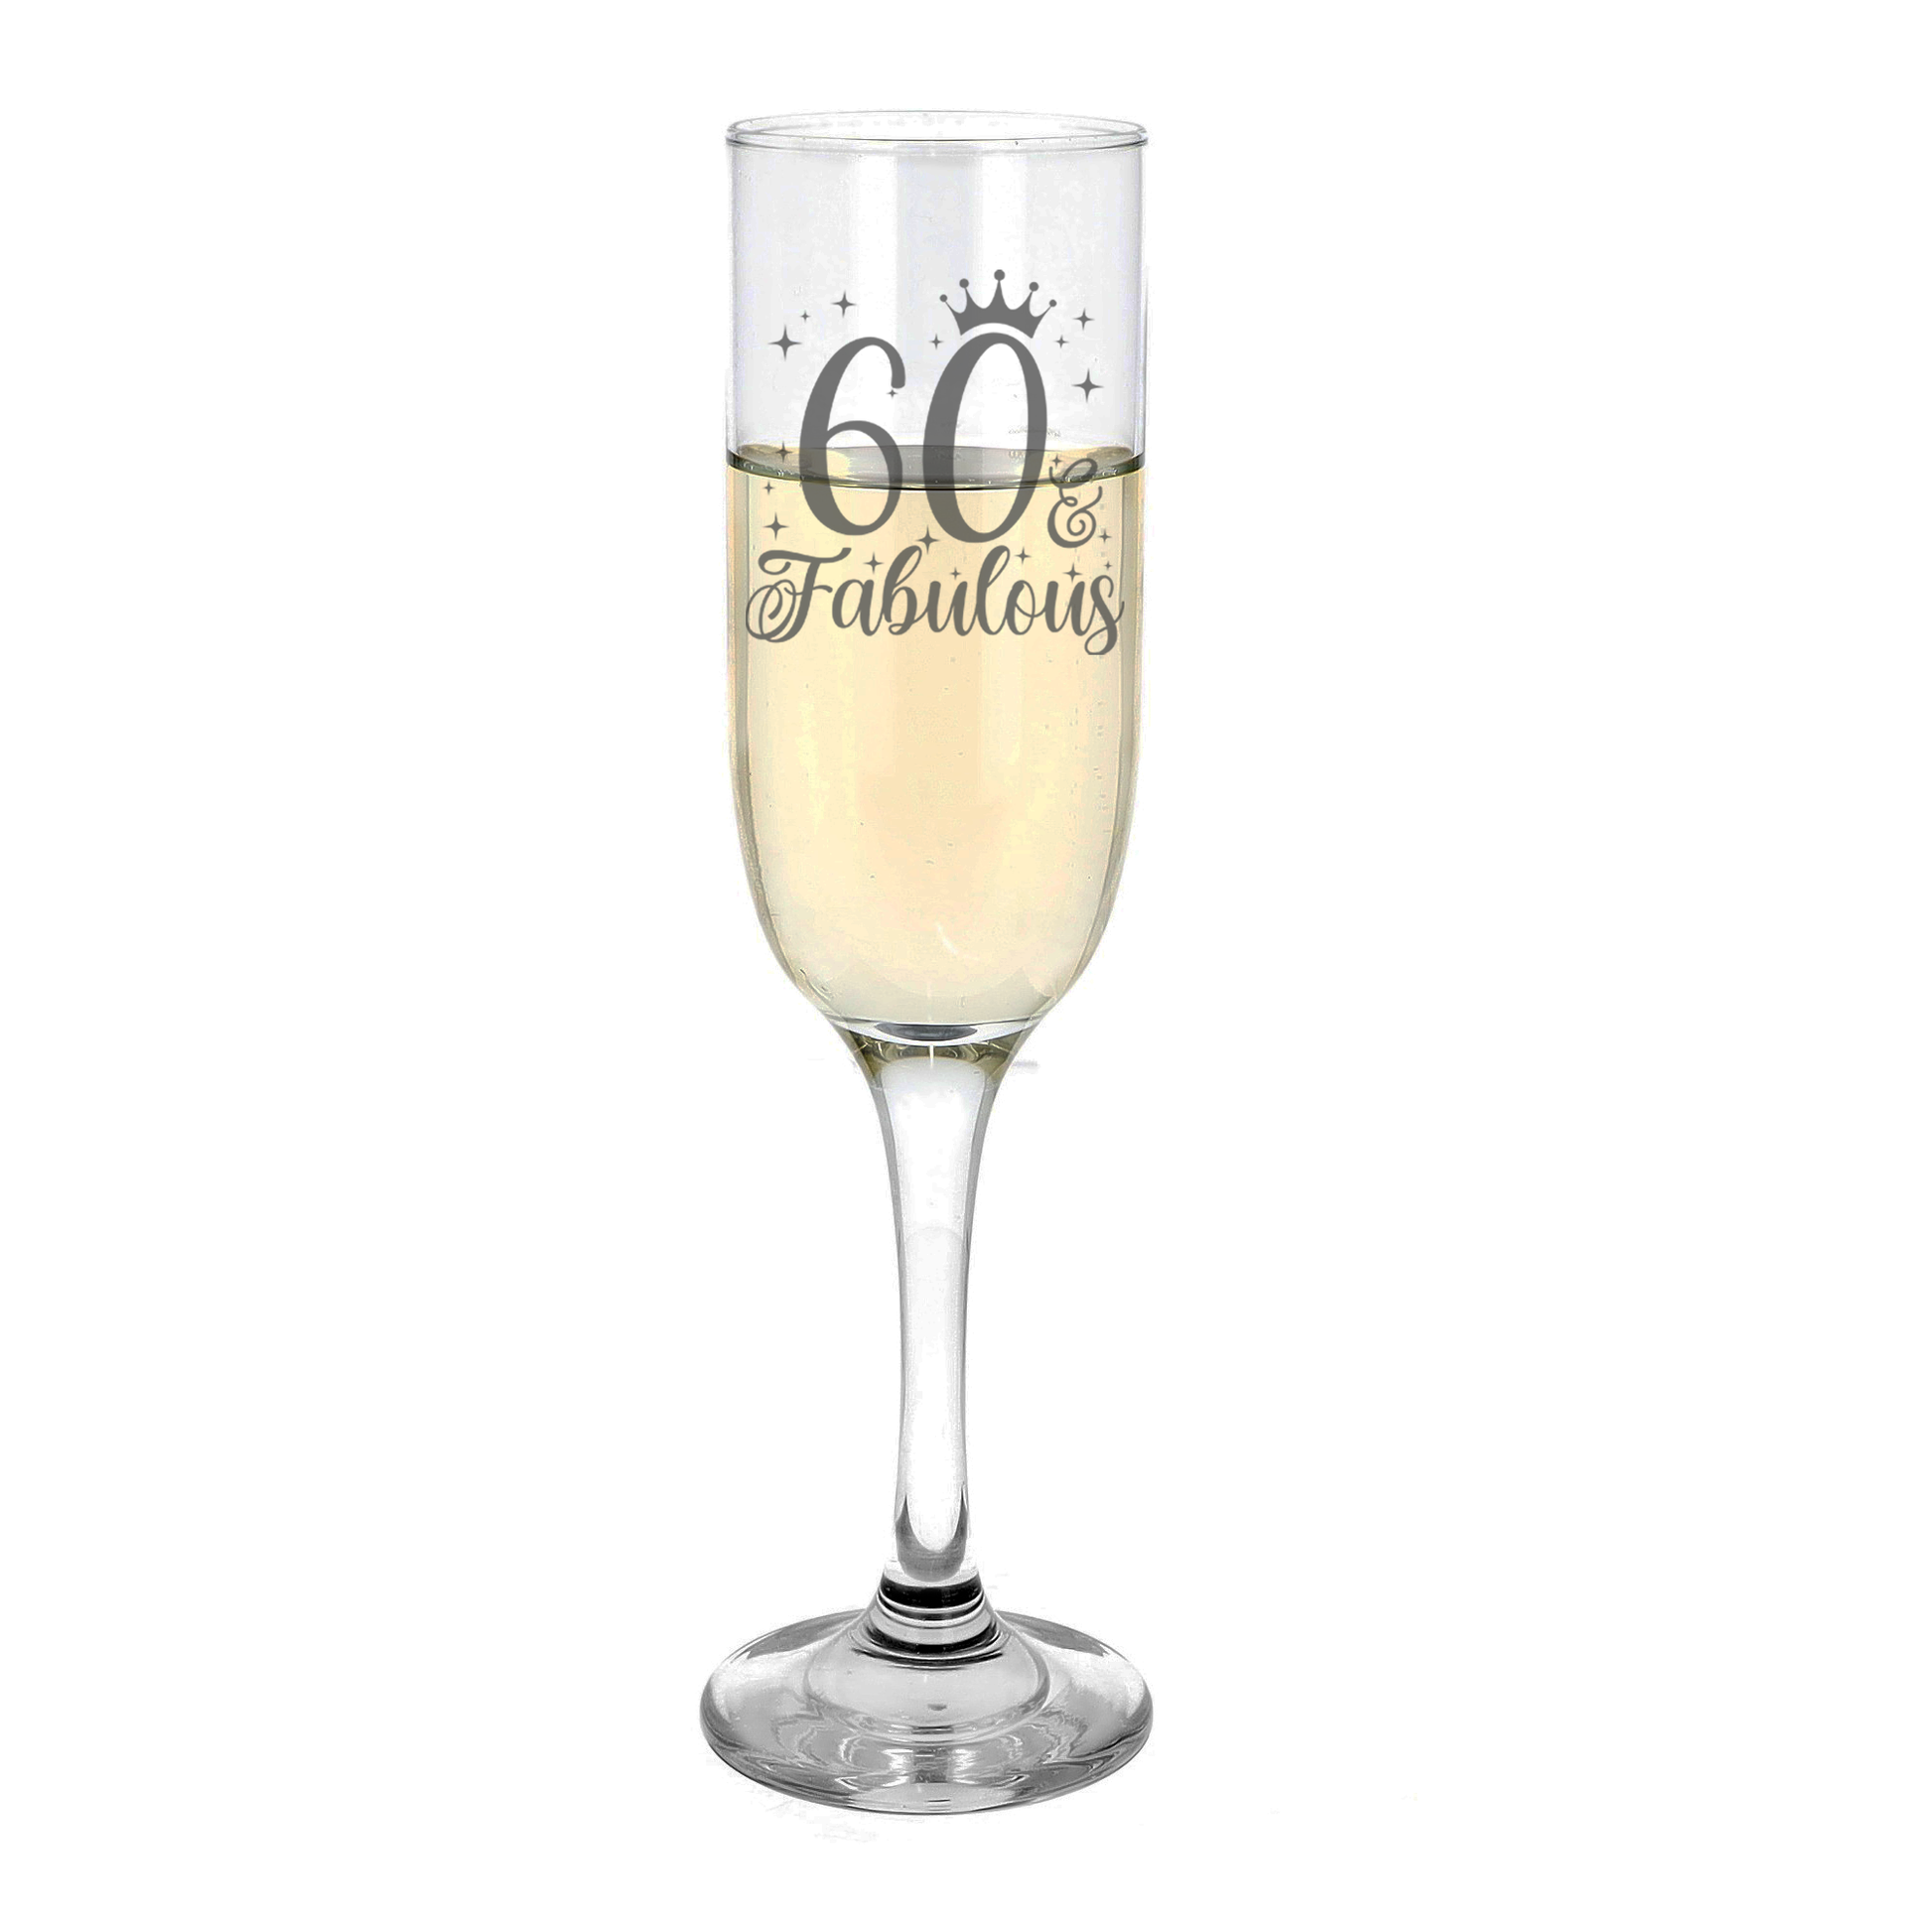 60 & Fabulous Engraved Champagne Glass and/or Coaster Set  - Always Looking Good -   